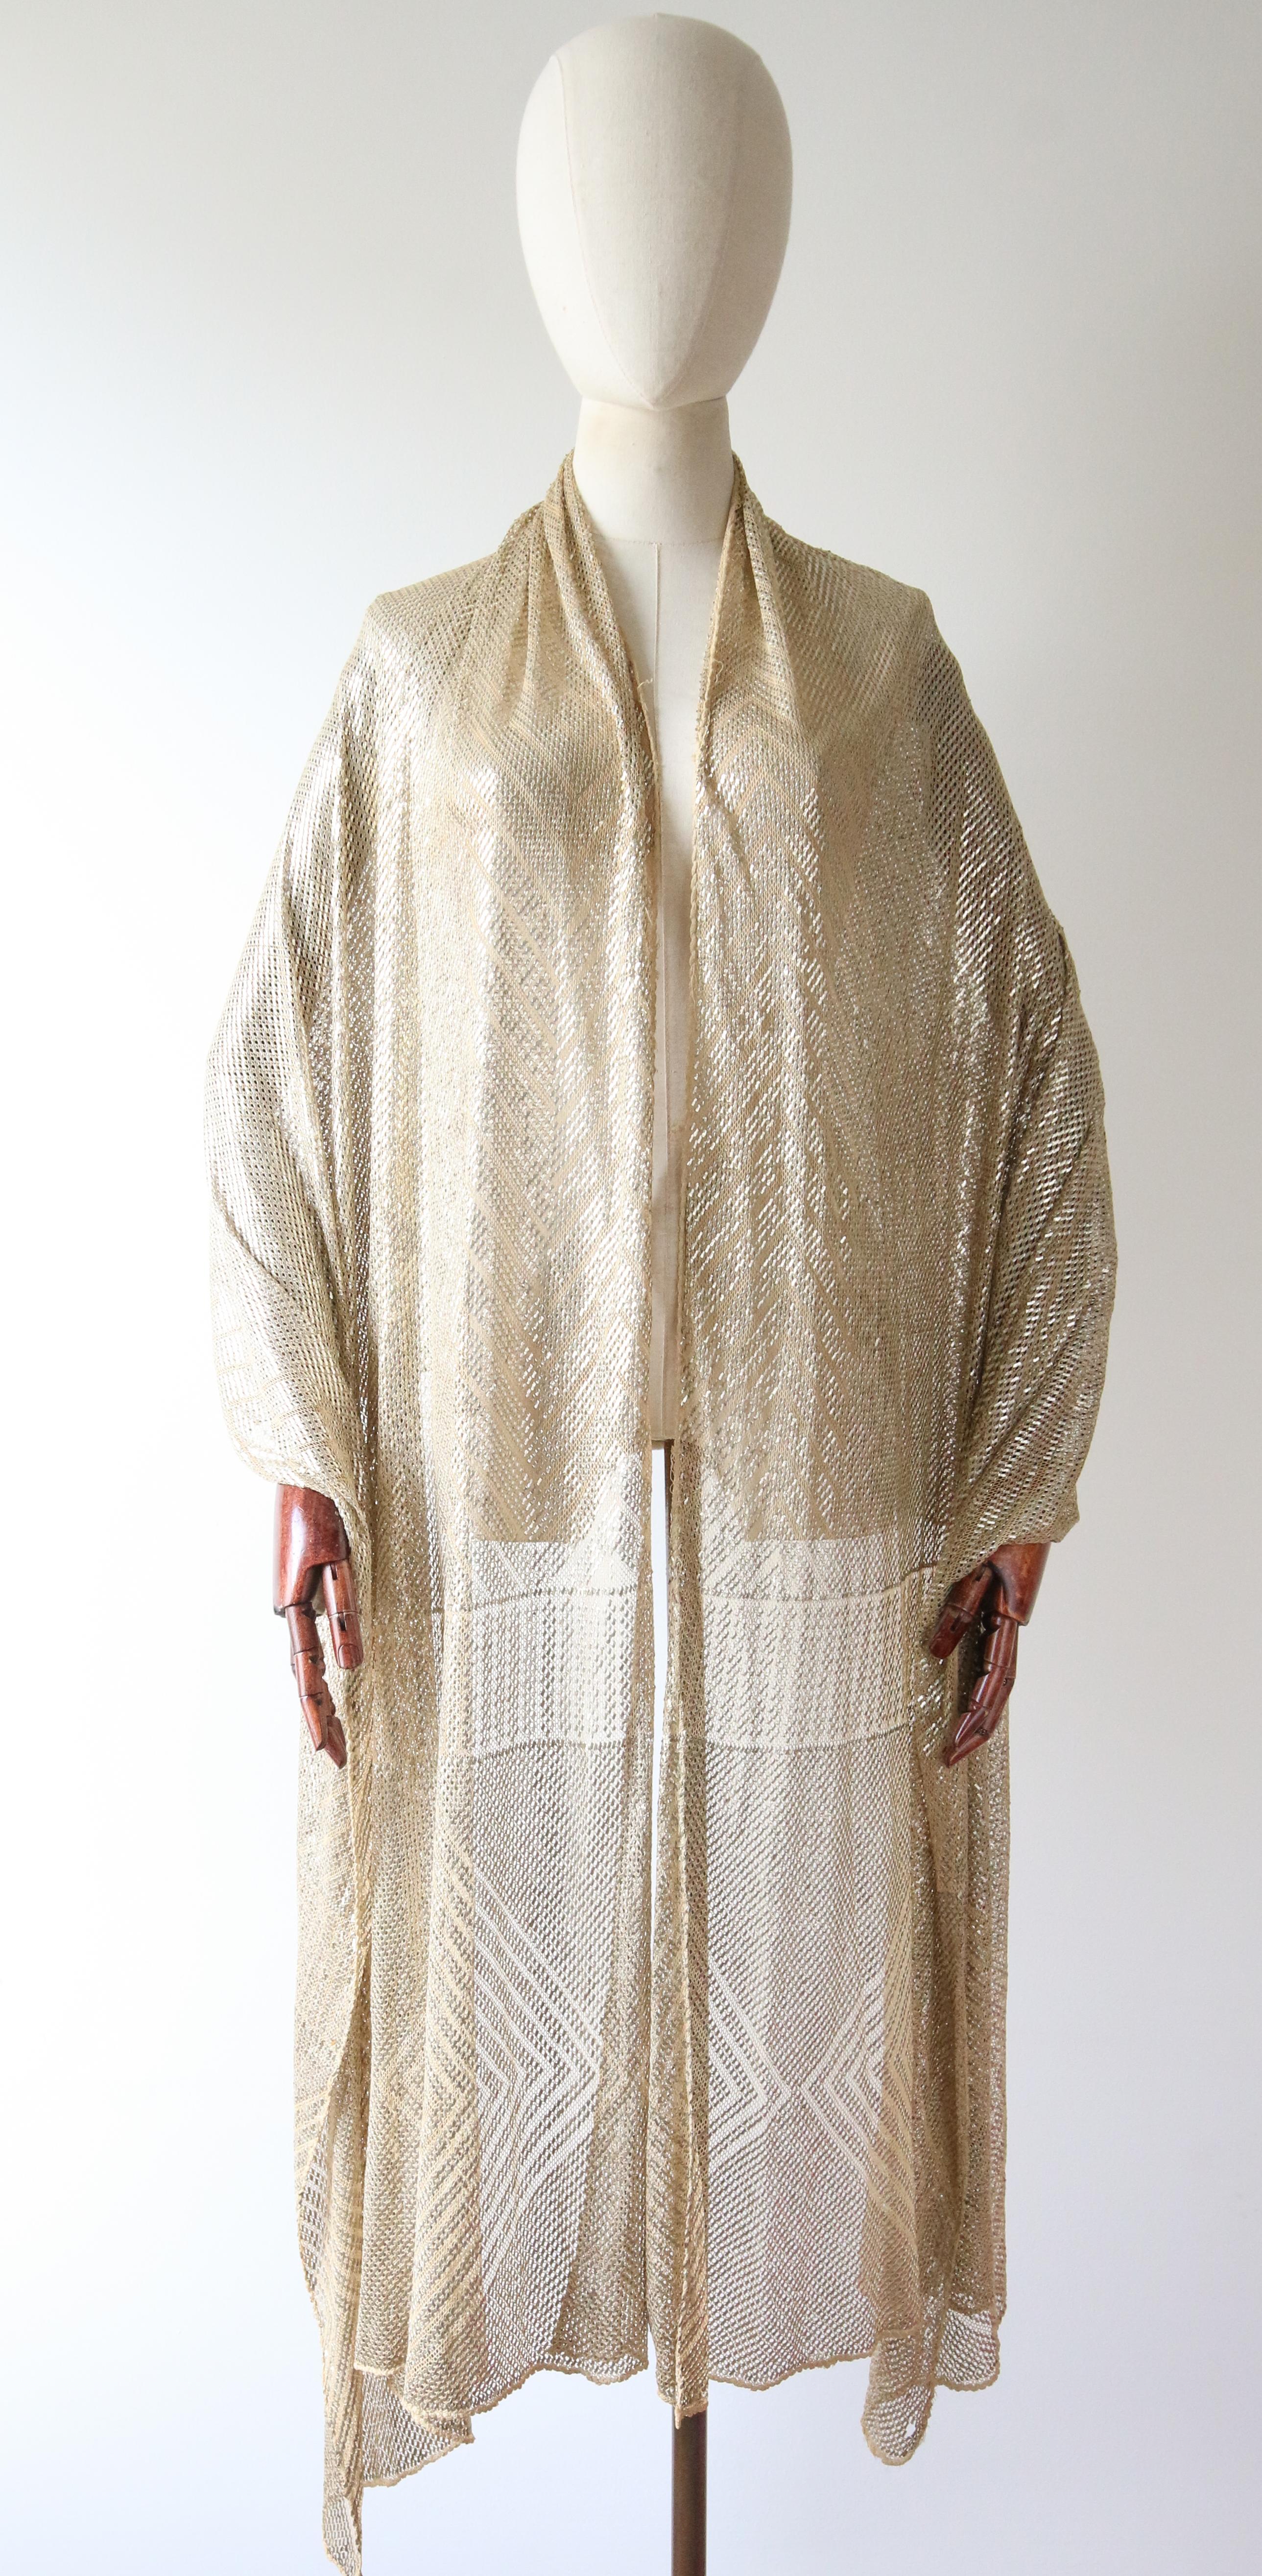 This breathtaking 1920's cream cotton mesh asssuit shawl, stamped with a grid and geometrical diamond design along each of the extremities, is a piece of true fashion history.

Her wonderful weight, allows for the shawl to drape effortlessly over